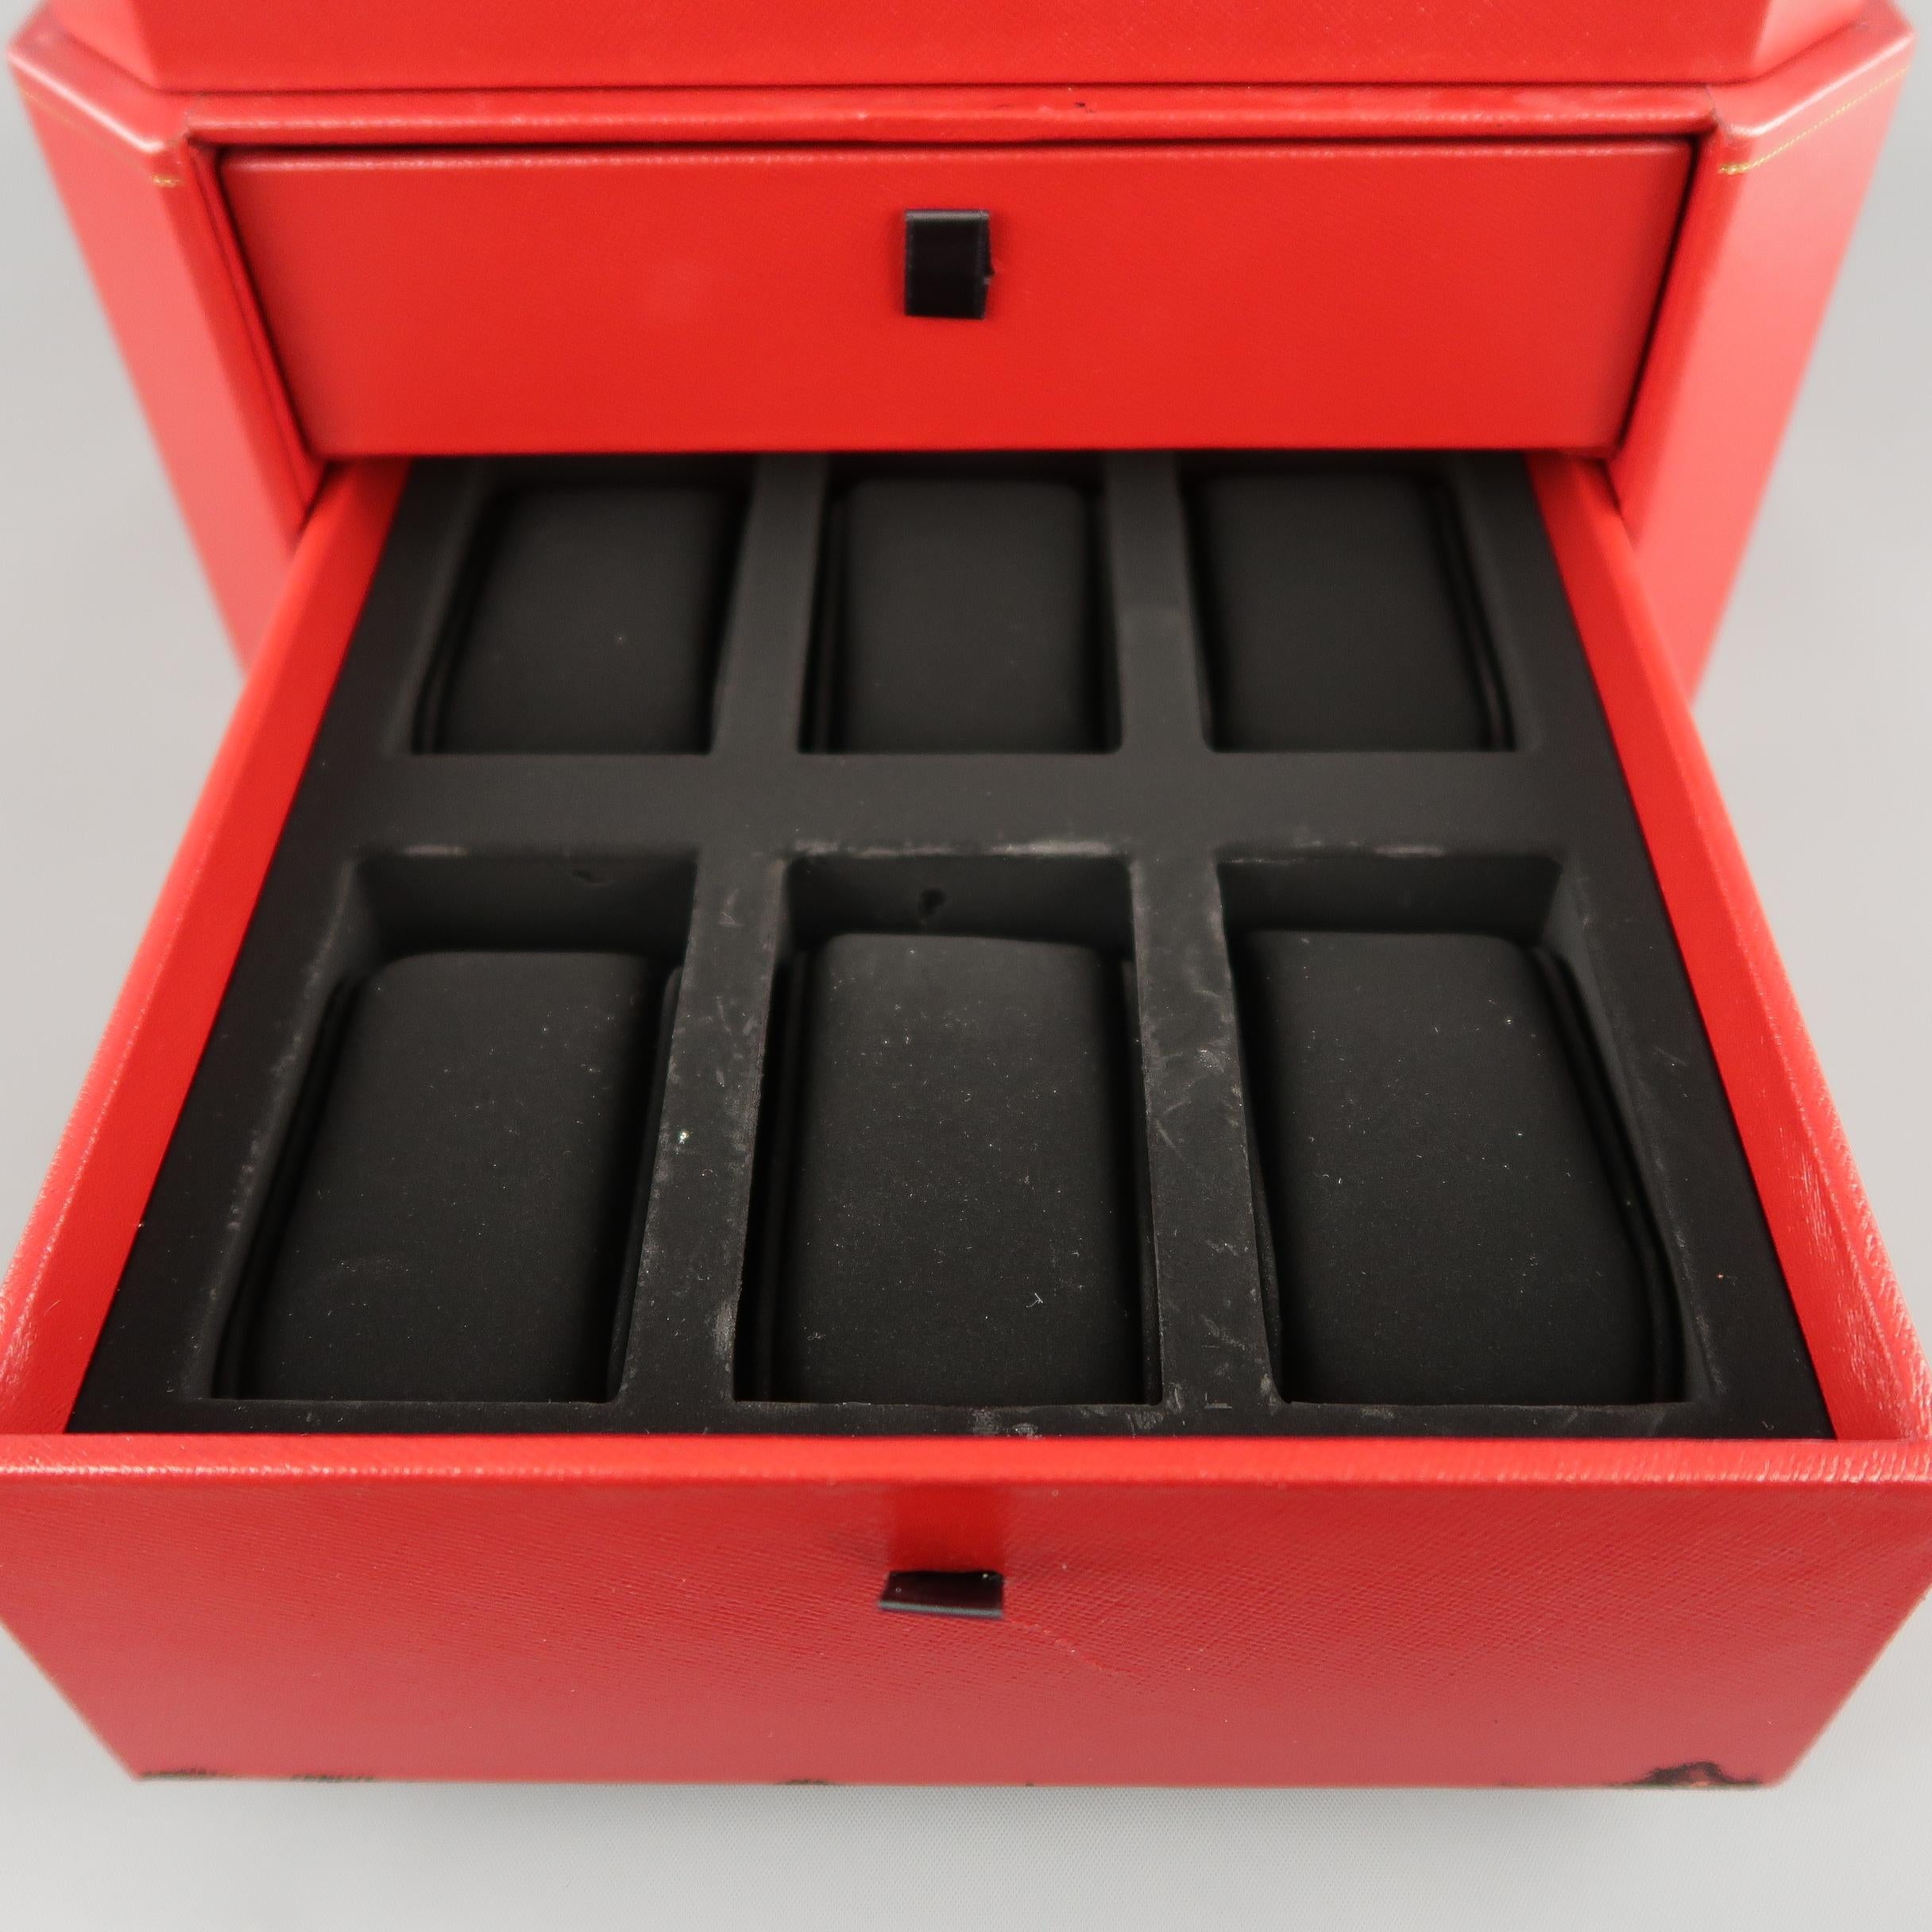 Women's or Men's Vintage CARTIER Red Watch & Jewelry Storage Box with Drawer Compartments